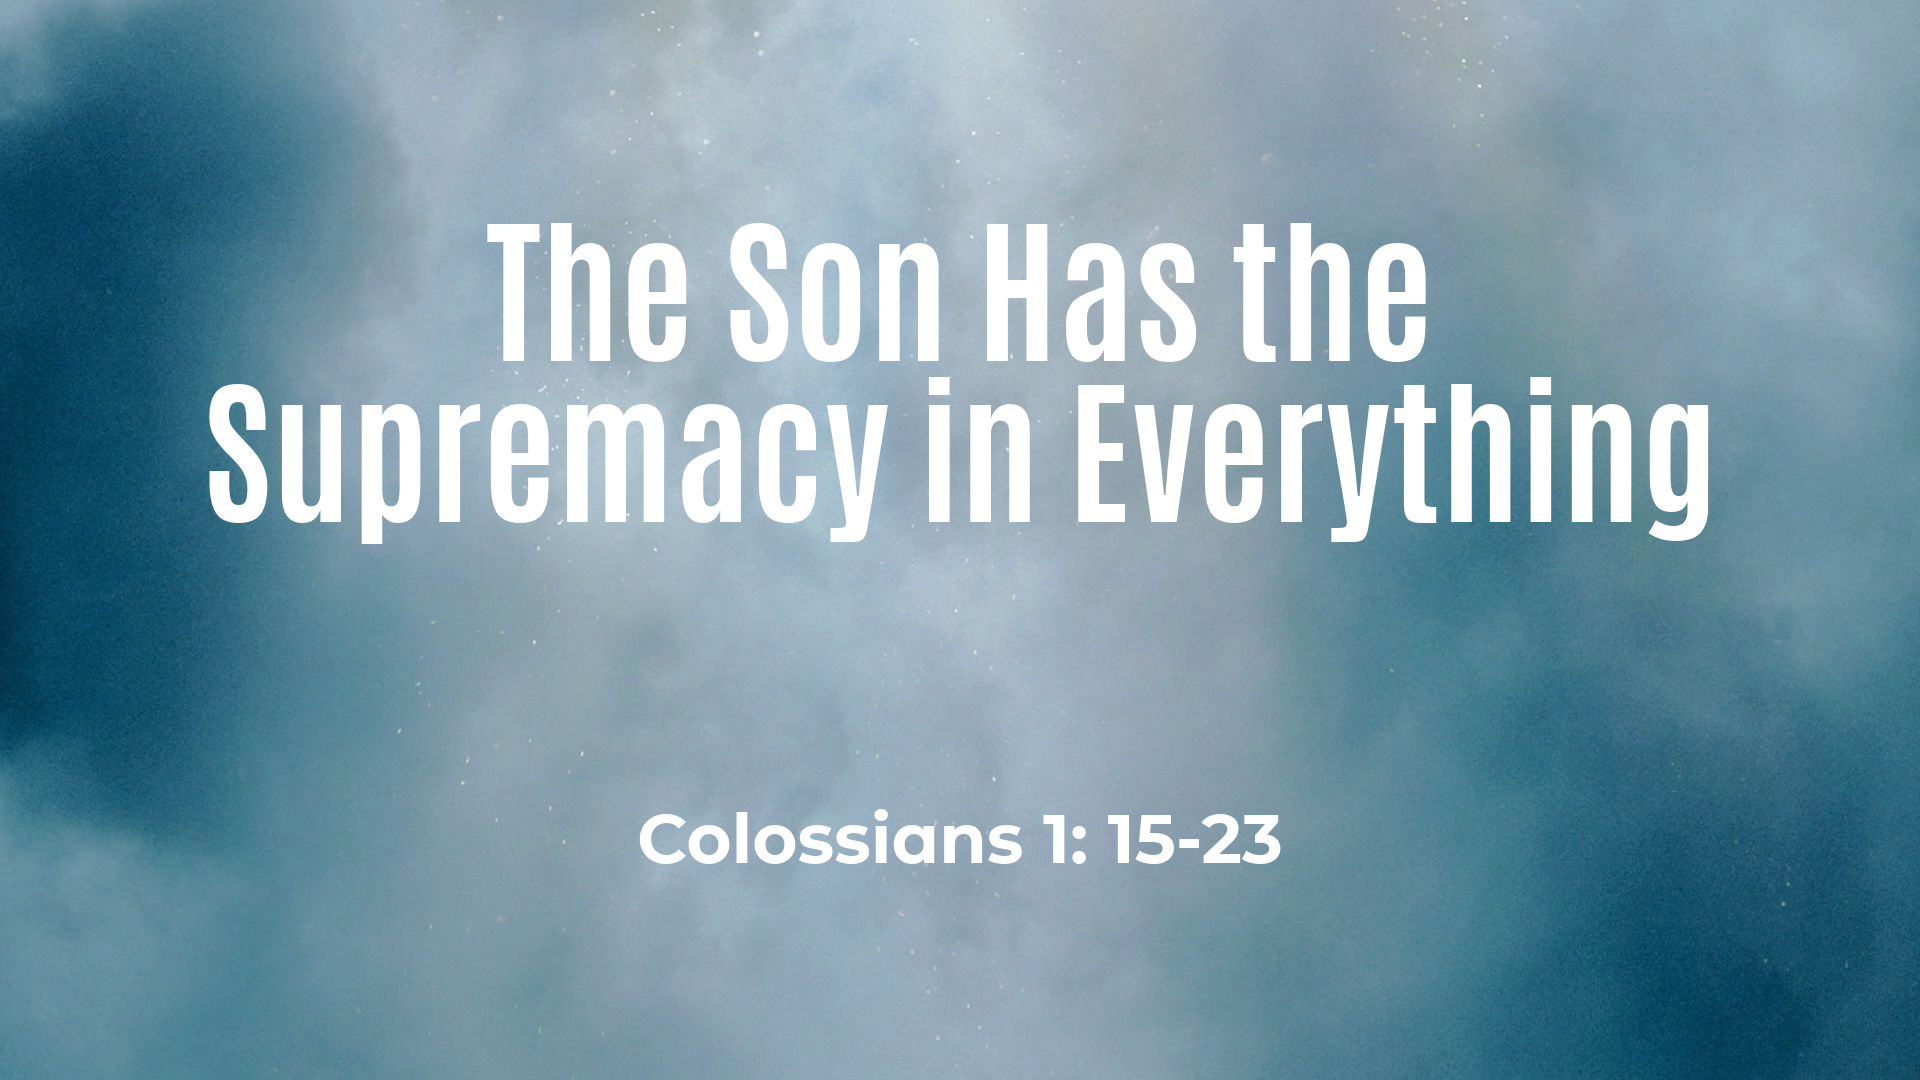 Jul 10, 2022 -  The Son Has the Supremacy in Everything  (Video) - Colossians 1: 15-23